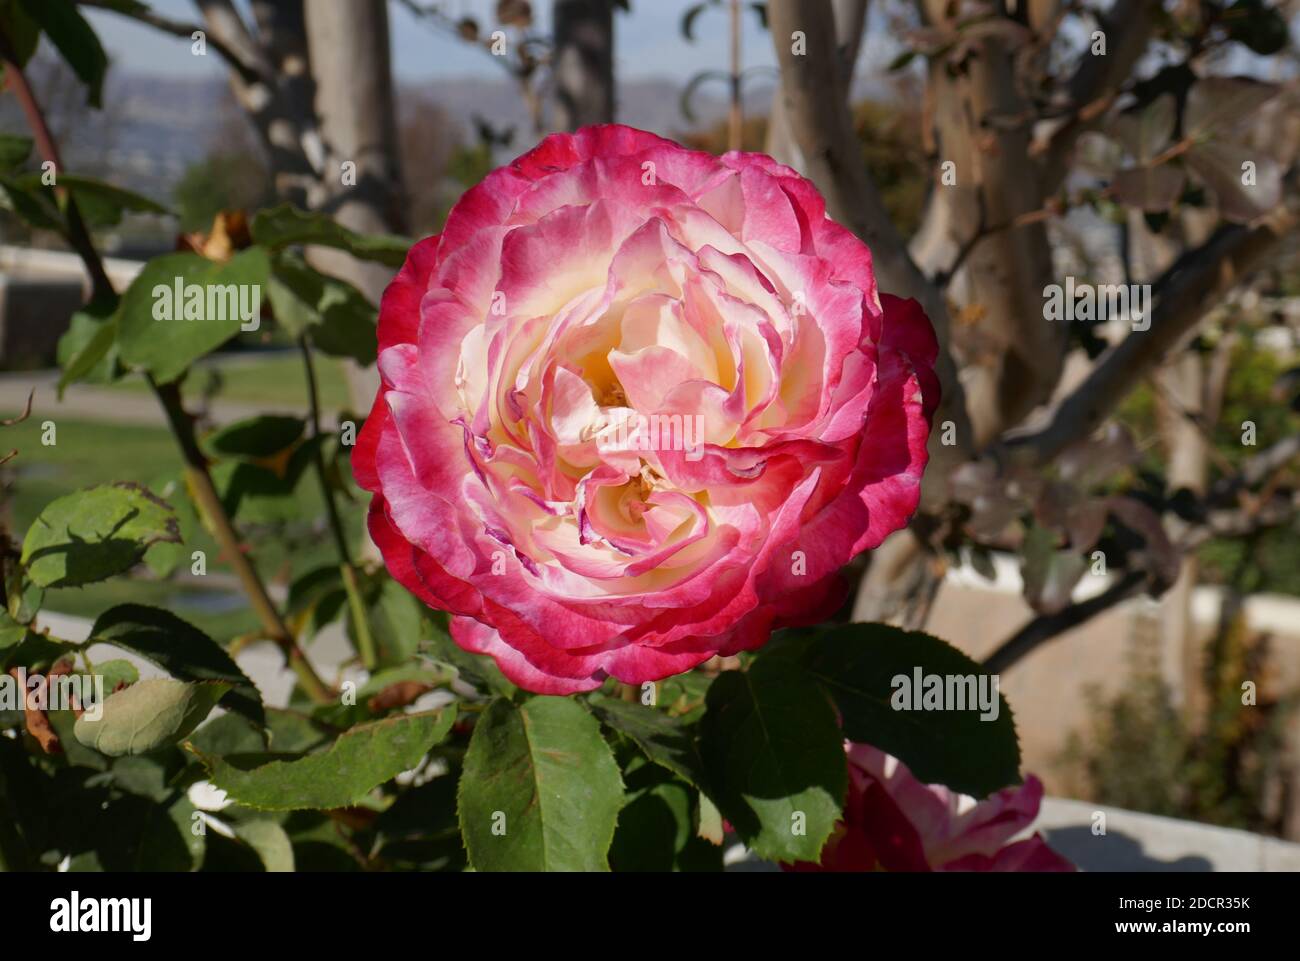 Los Angeles, California, USA 17th November 2020 A general view of atmosphere of rose at Mount Sinai Cemetery Hollywood Hills on November 17, 2020 in Los Angeles, California, USA. Photo by Barry King/Alamy Stock Photo Stock Photo